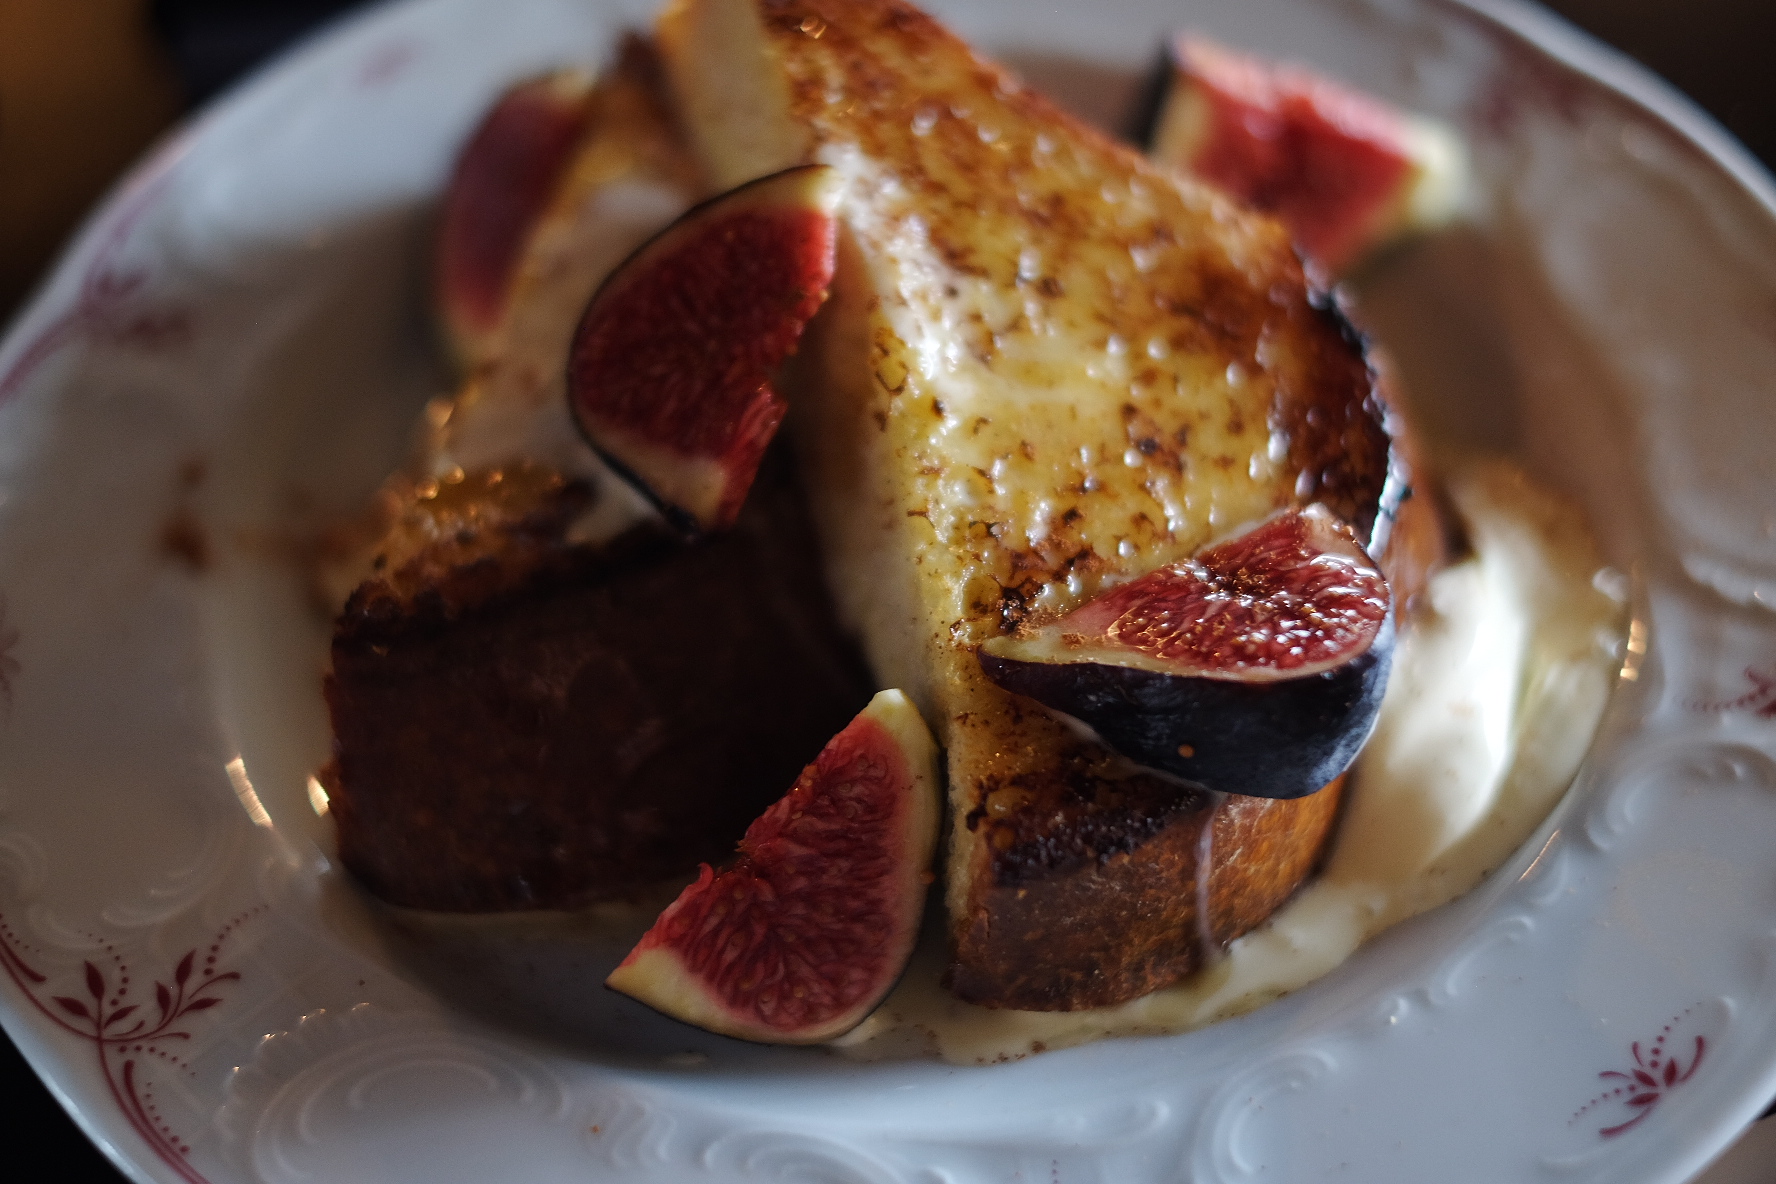 soft, pillowy french toast with maple syrup, figs, and whipped mascarpone cheese at café lomi in Paris' 18th arrondissement 